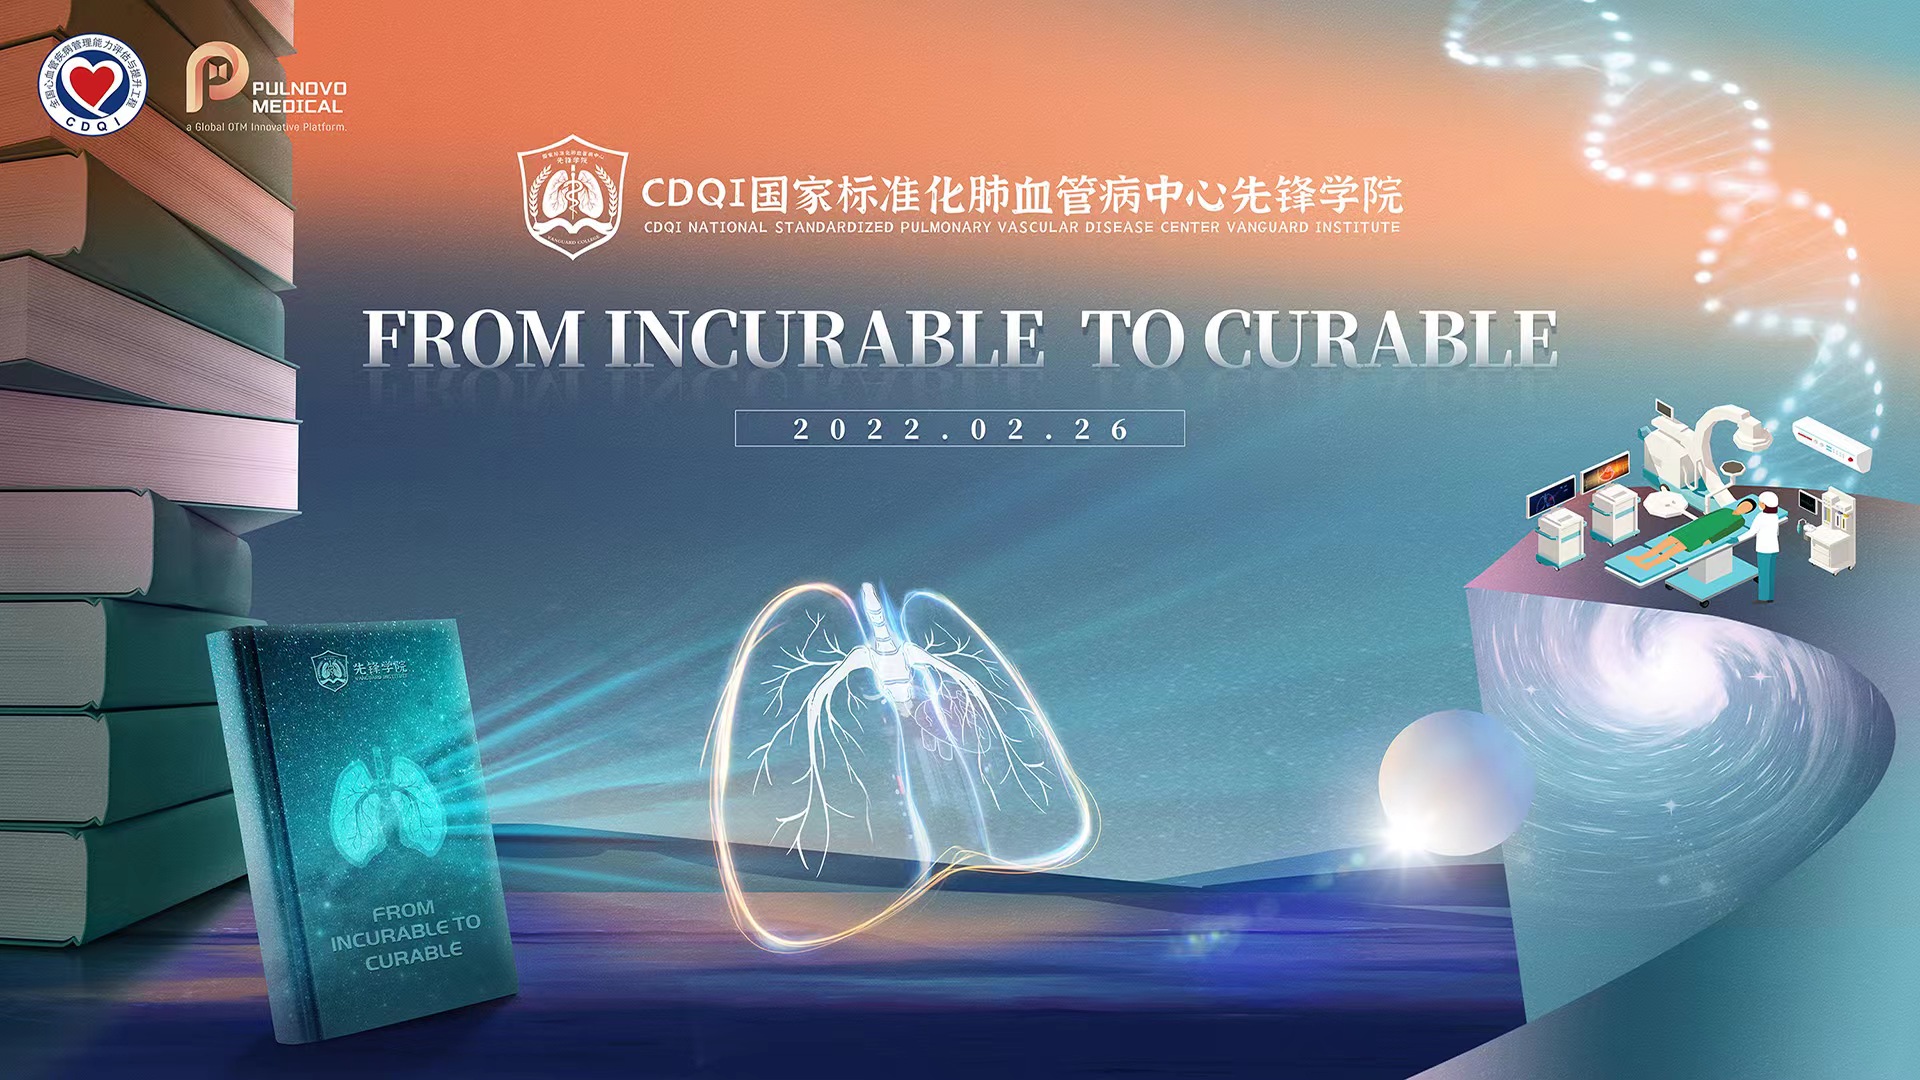 CDQI先锋学院：From Incurable to Curable